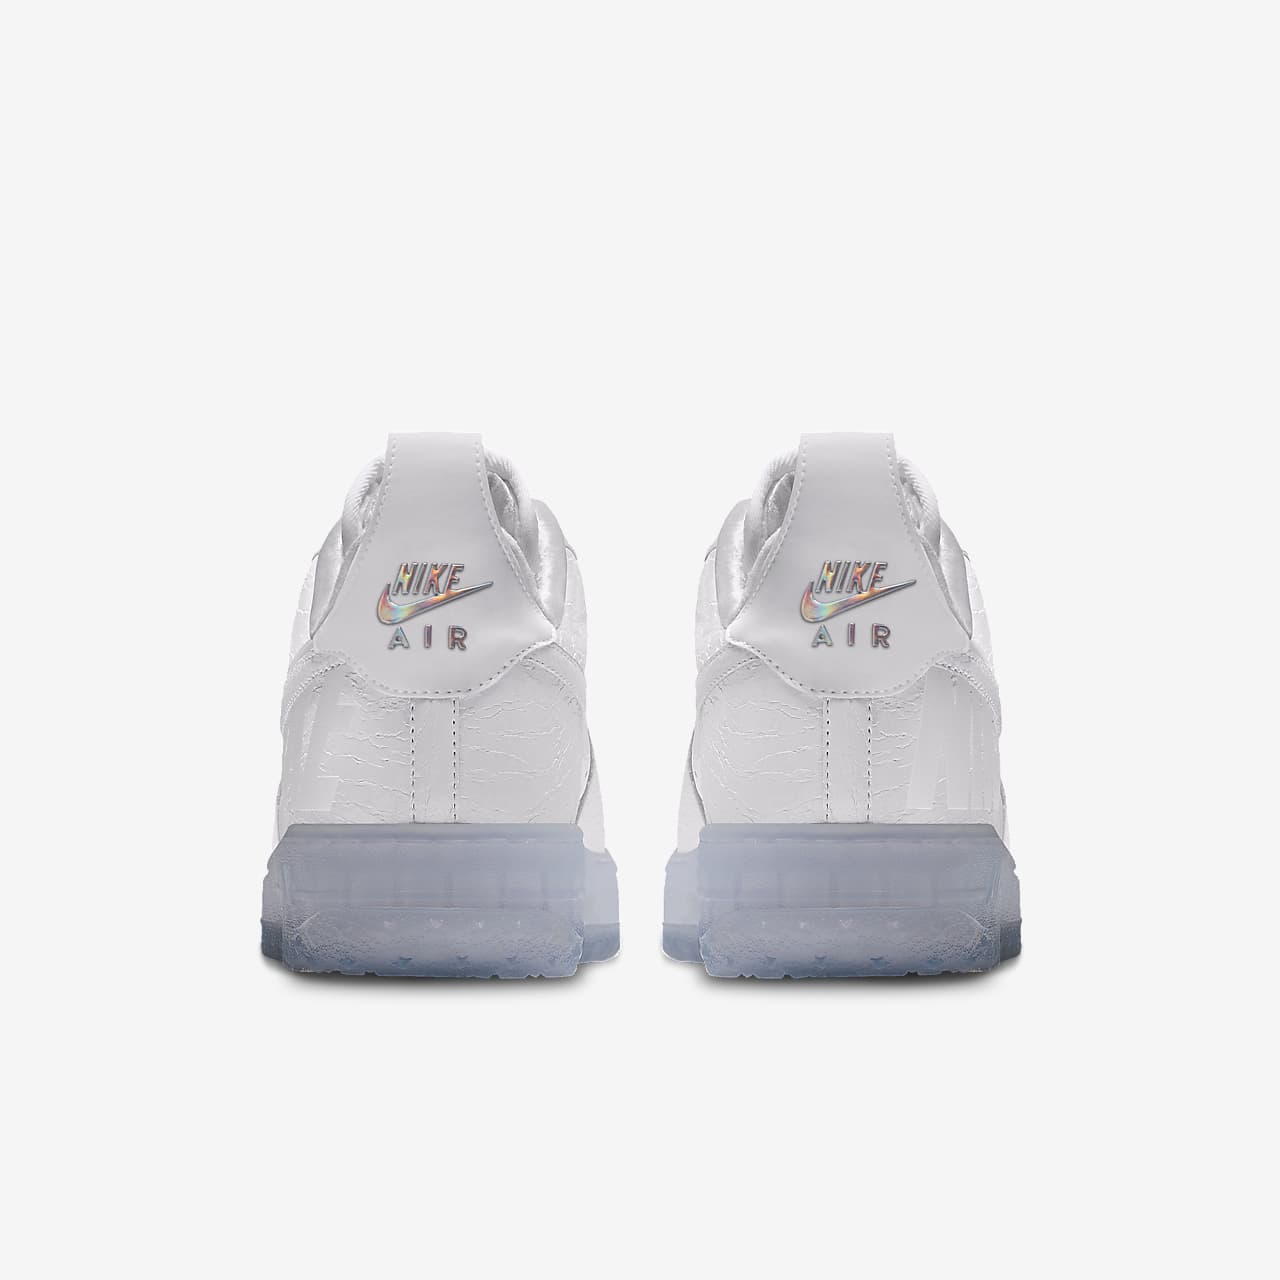 air force one winter white